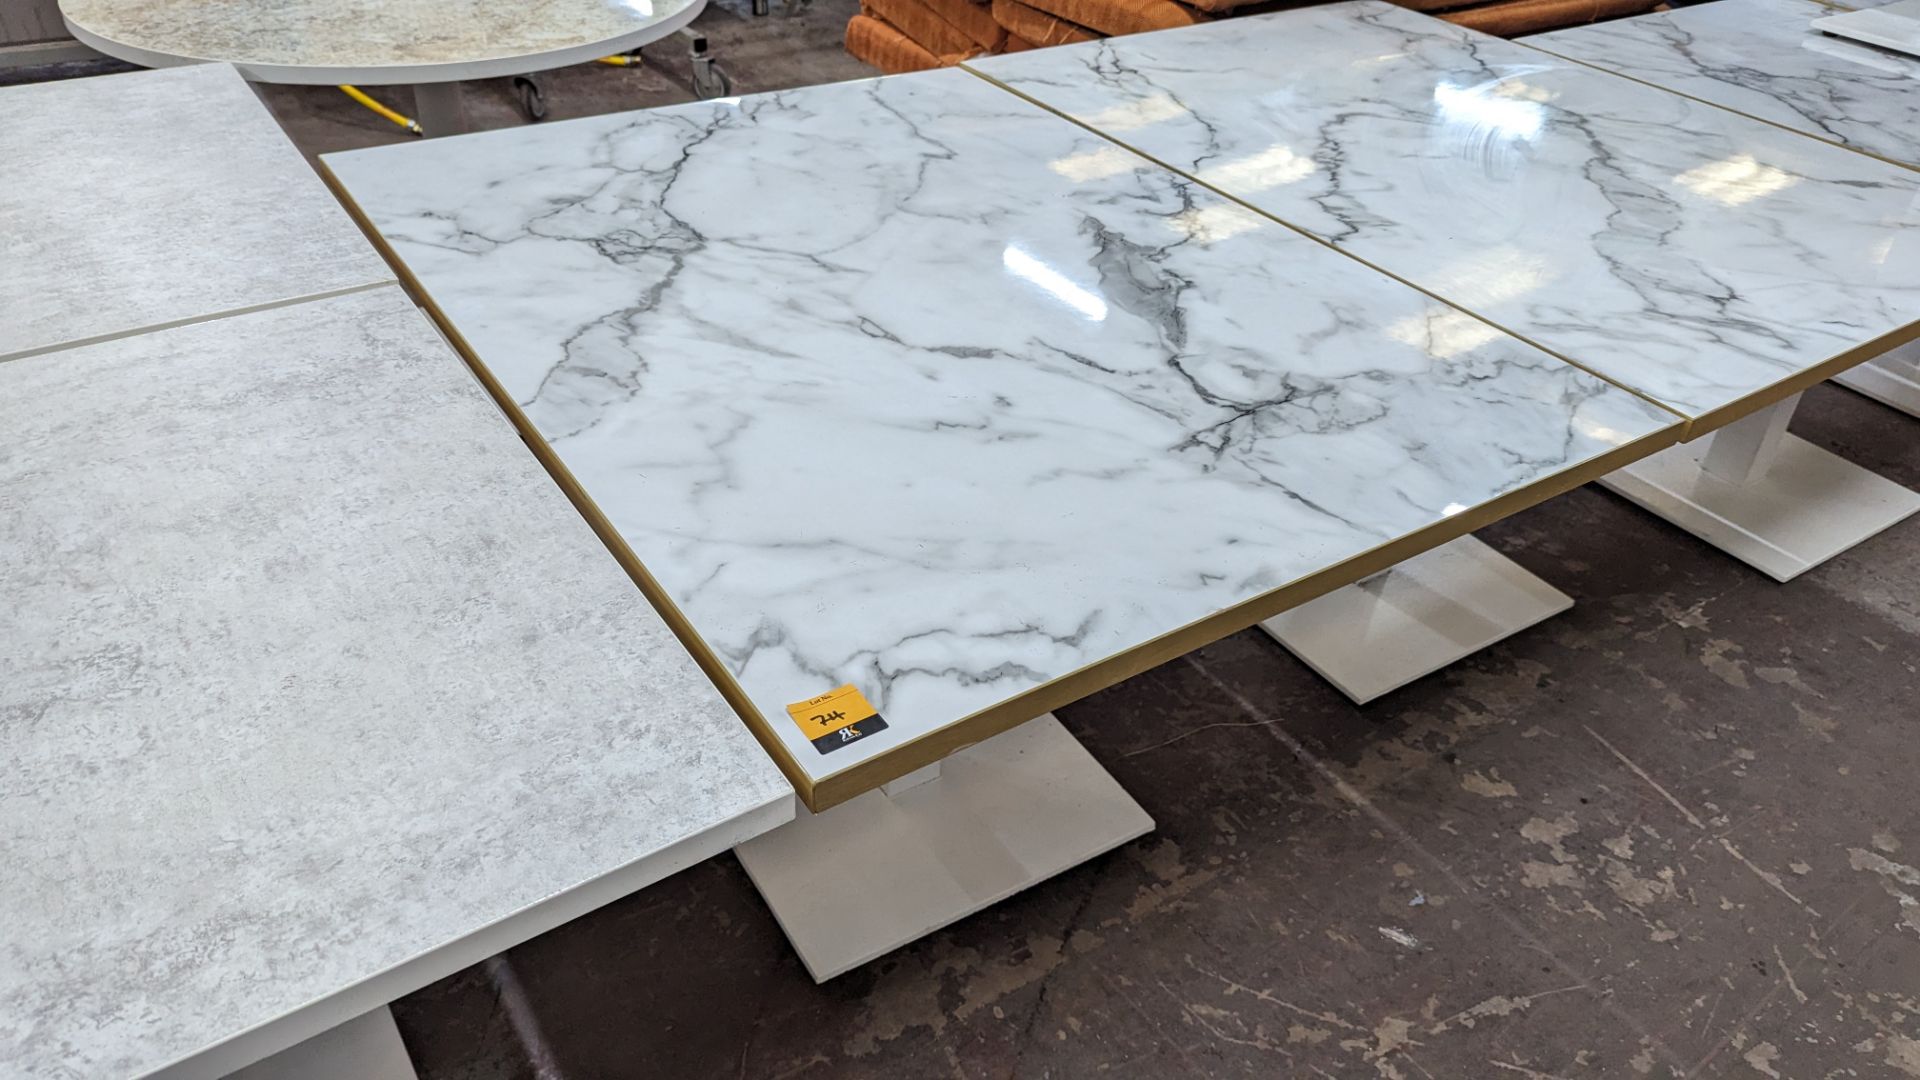 10 off matching dining tables in 3 different sizes with marble effect tops. 2 of the tables are ret - Image 3 of 19